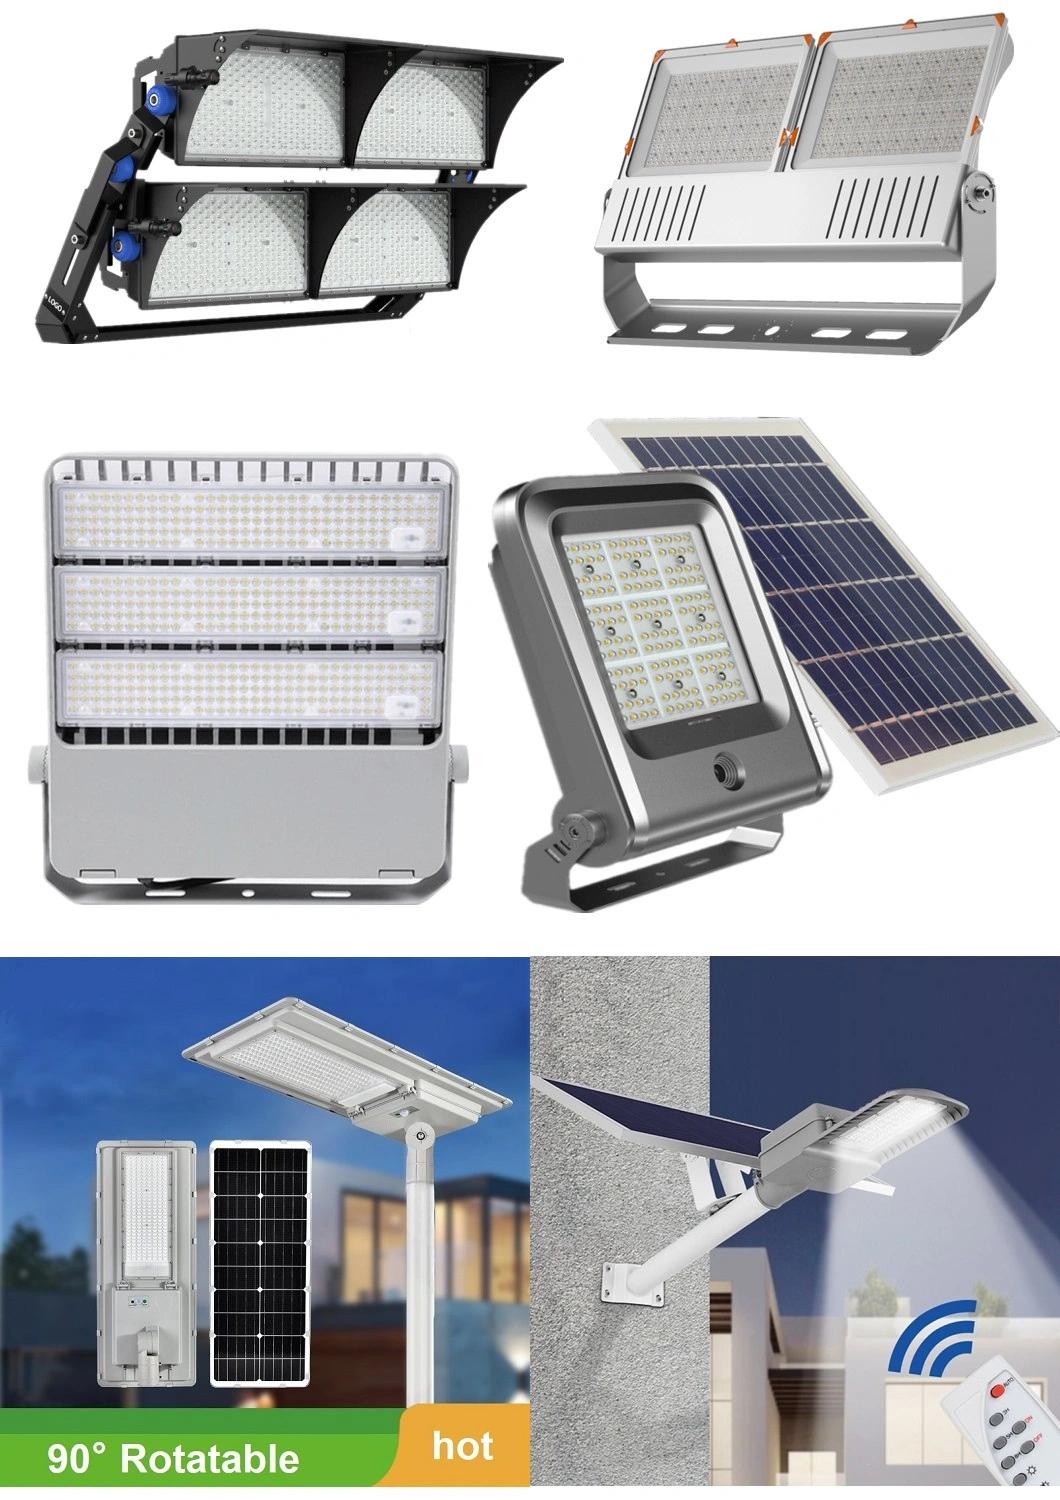 Outdoor Explosion Flame Proof LED Canopy Lights for Petrol Pump Gas Station Fuel Service